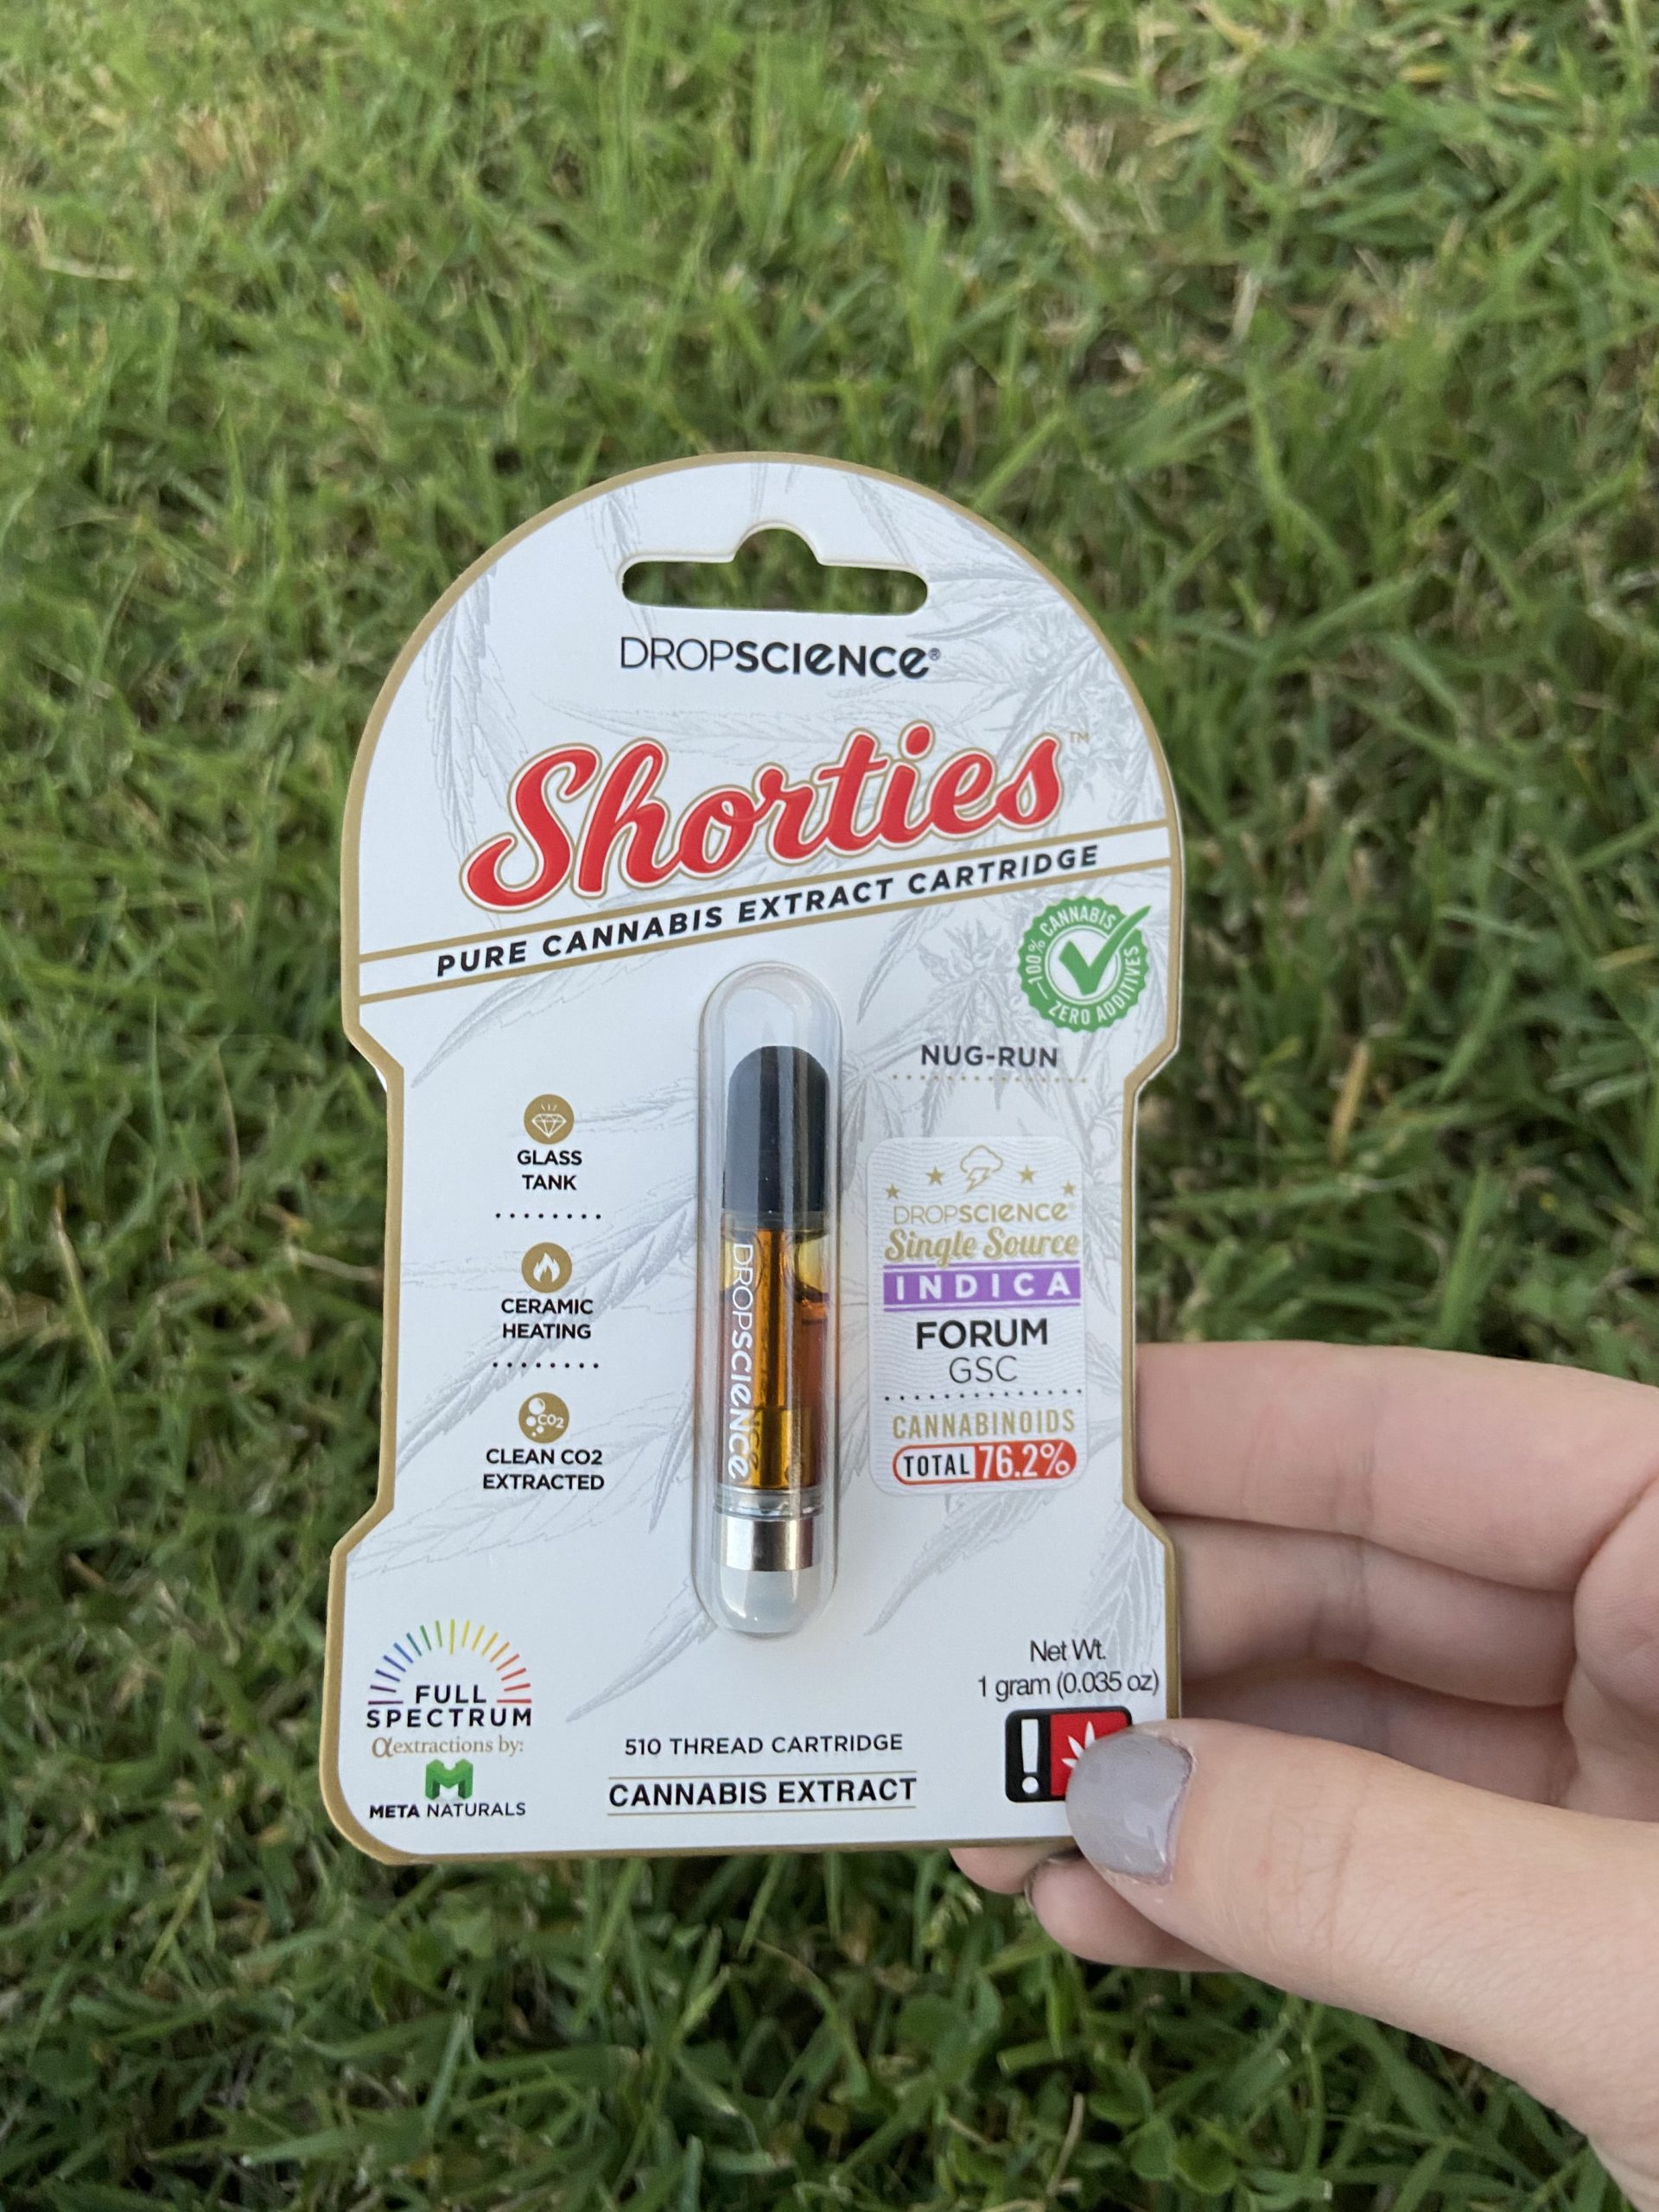 Pure Cannabis Extract cartridge